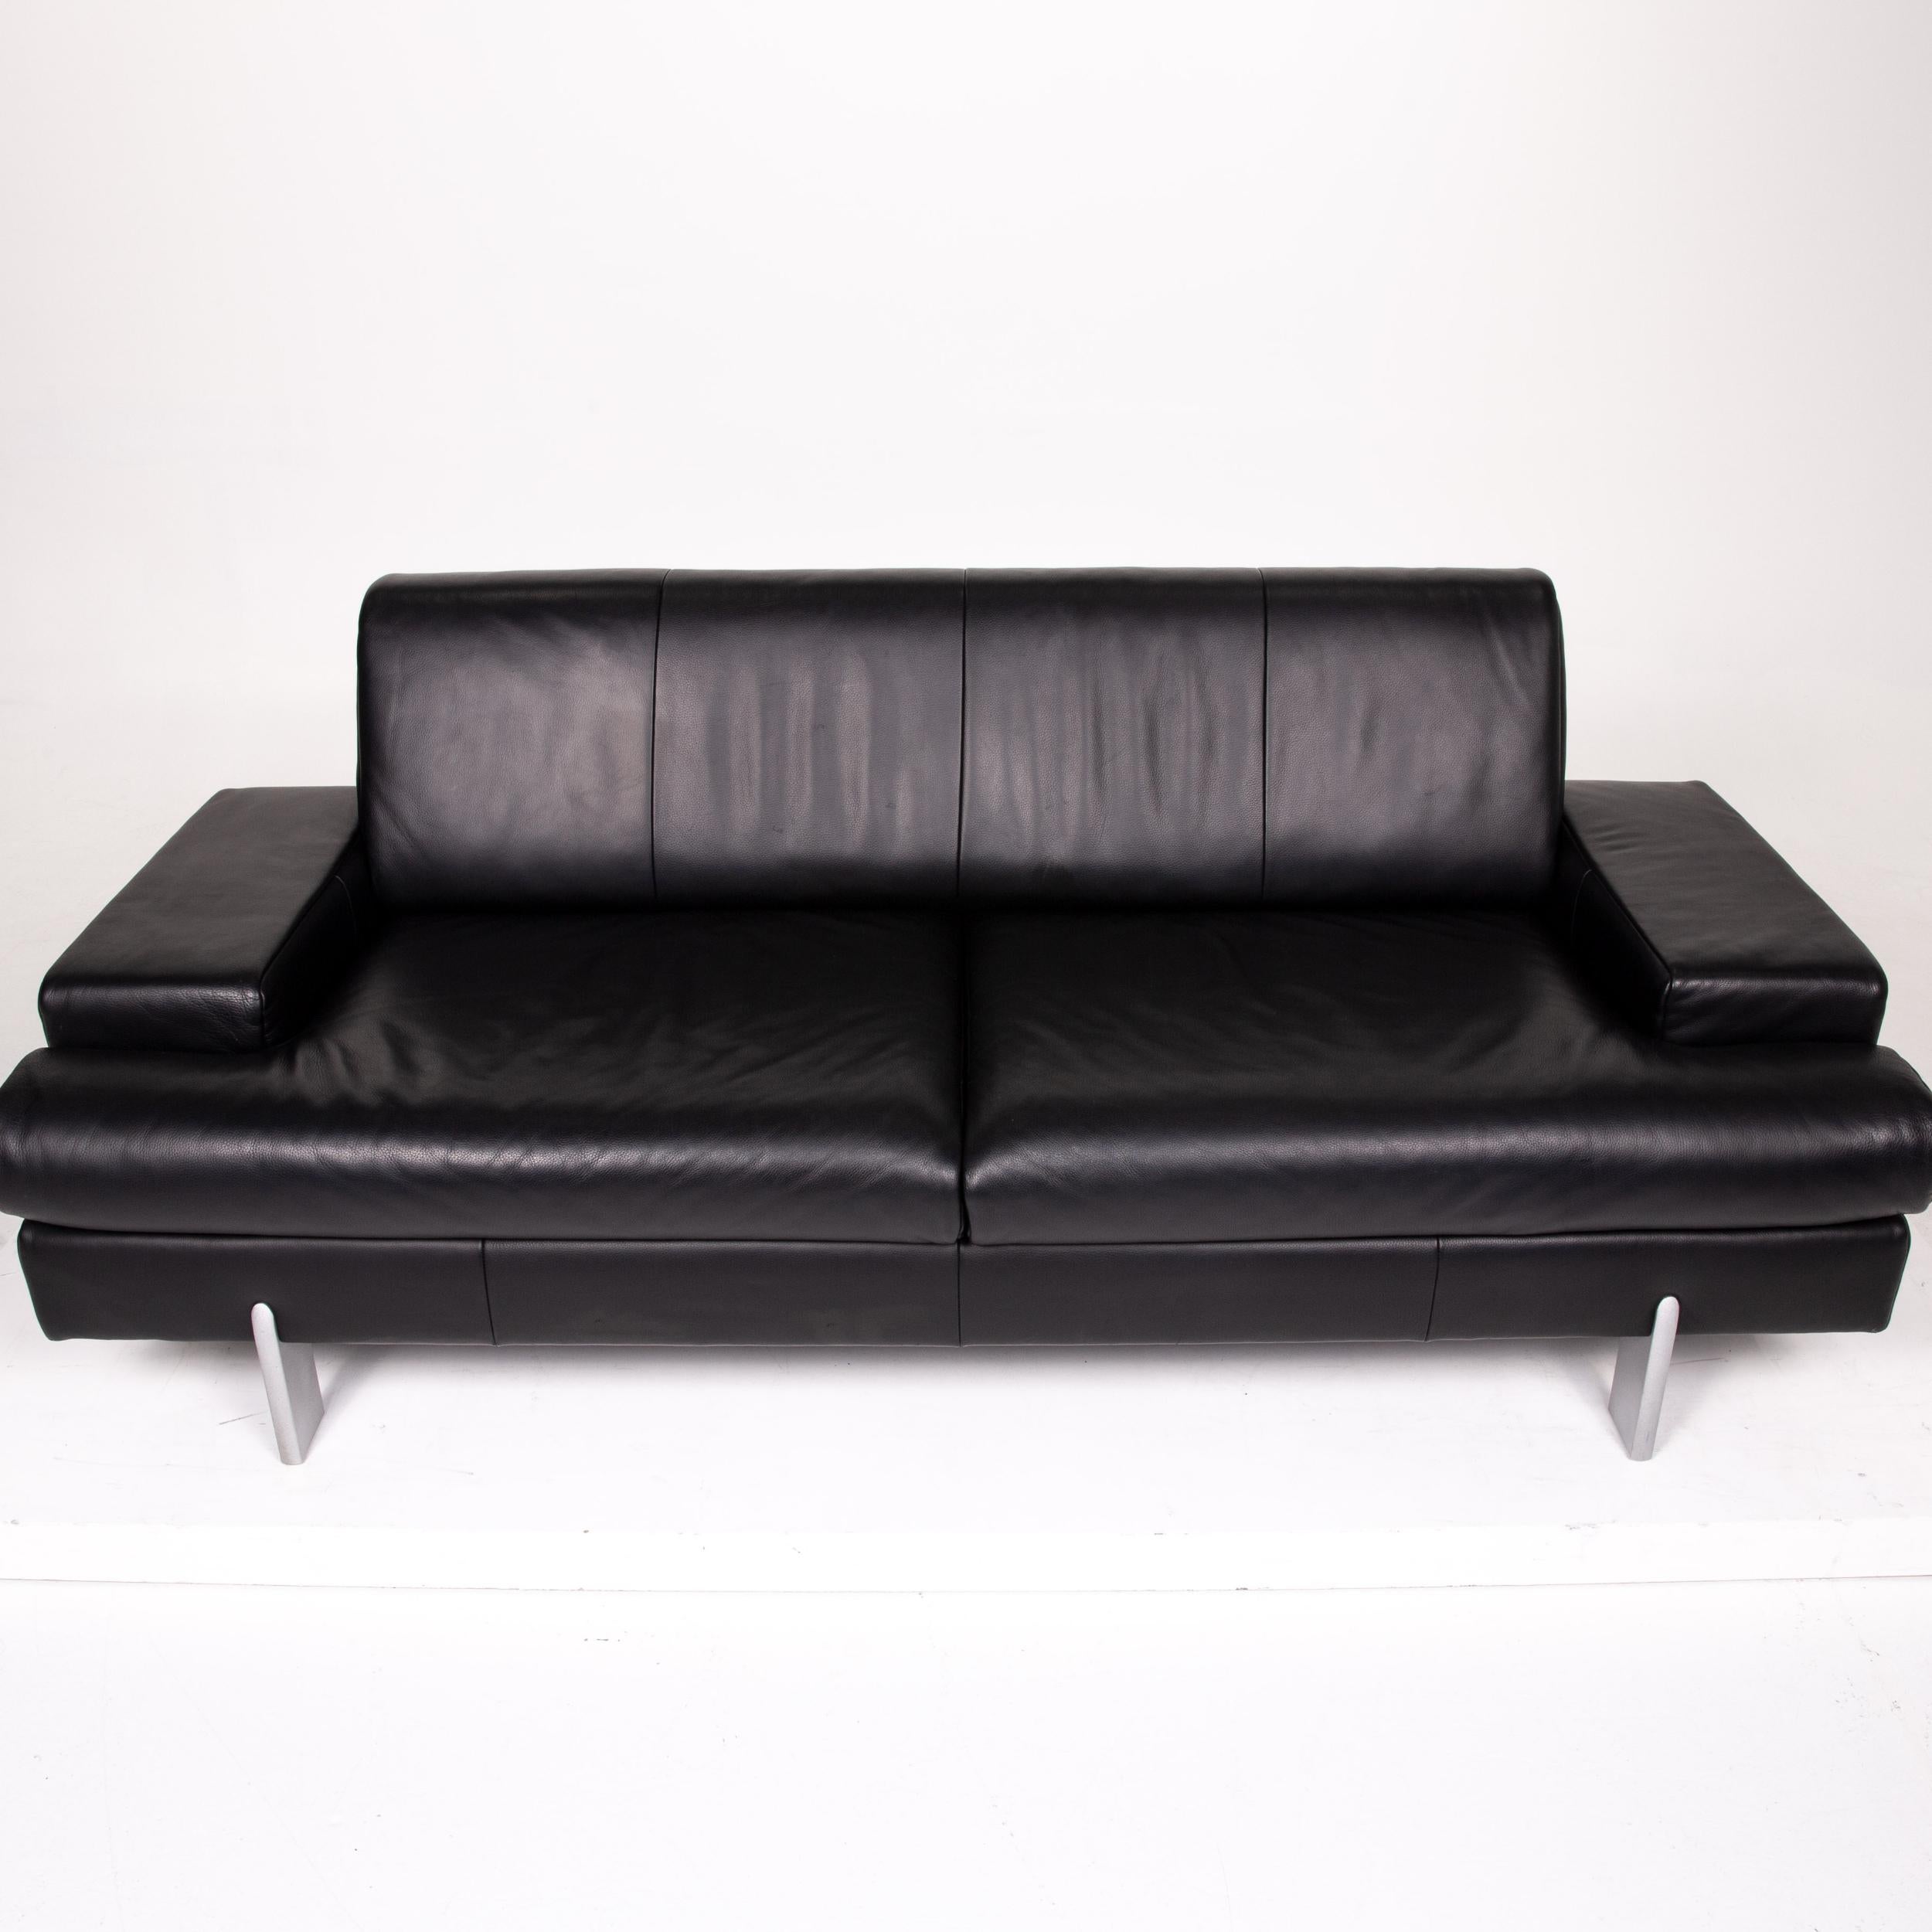 Rolf Benz AK 644 Leather Sofa Black Three-Seat Couch In Good Condition For Sale In Cologne, DE